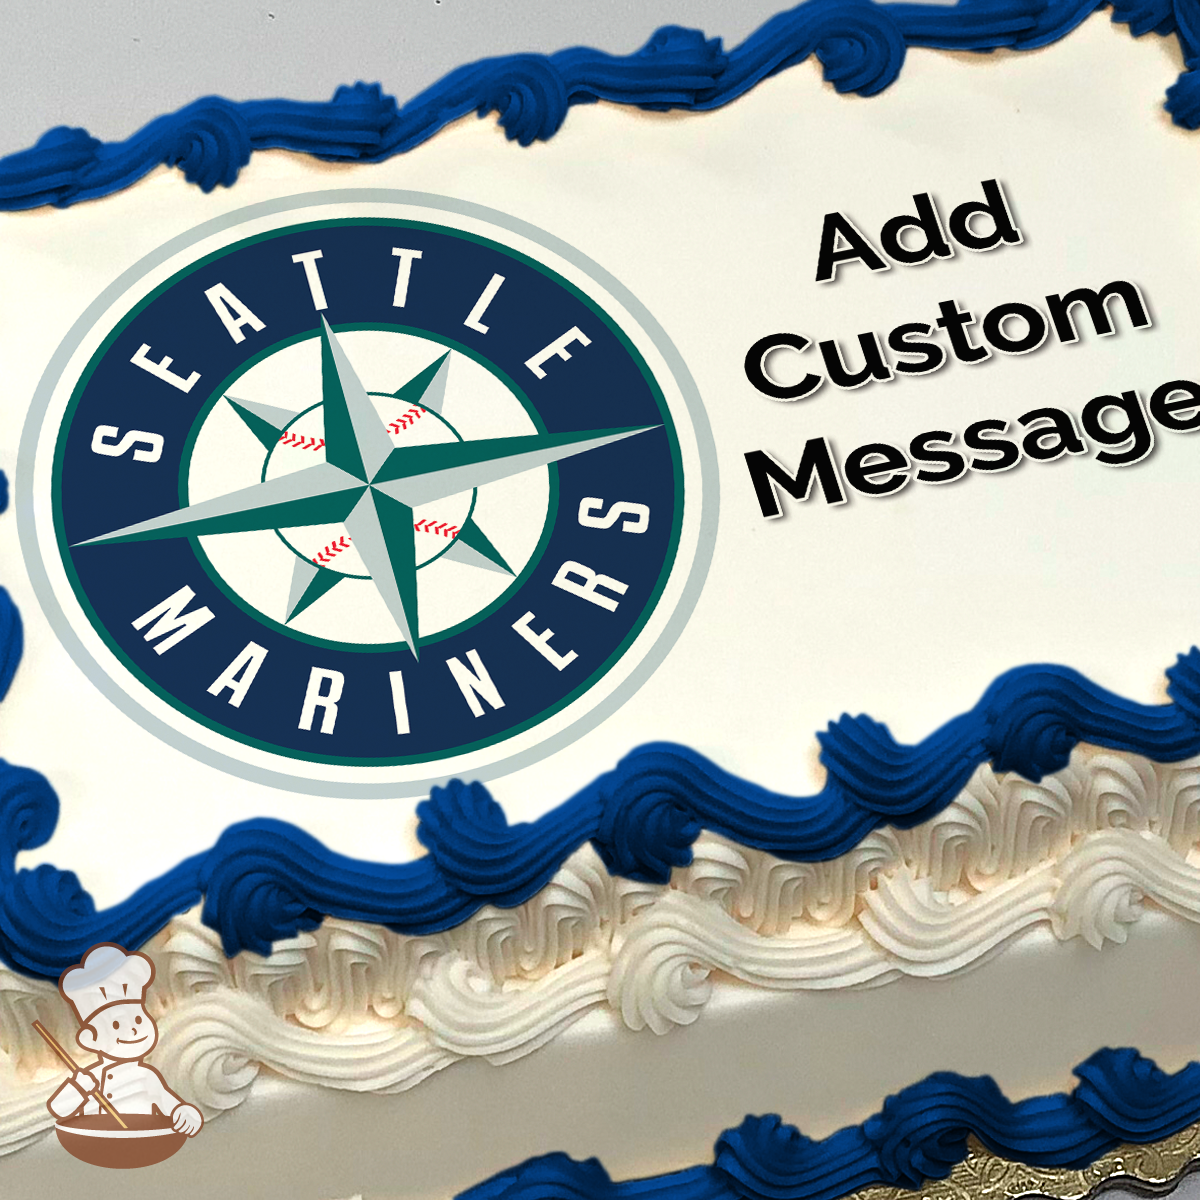 1984 Seattle Mariners Mother's Cookies YOU PICK